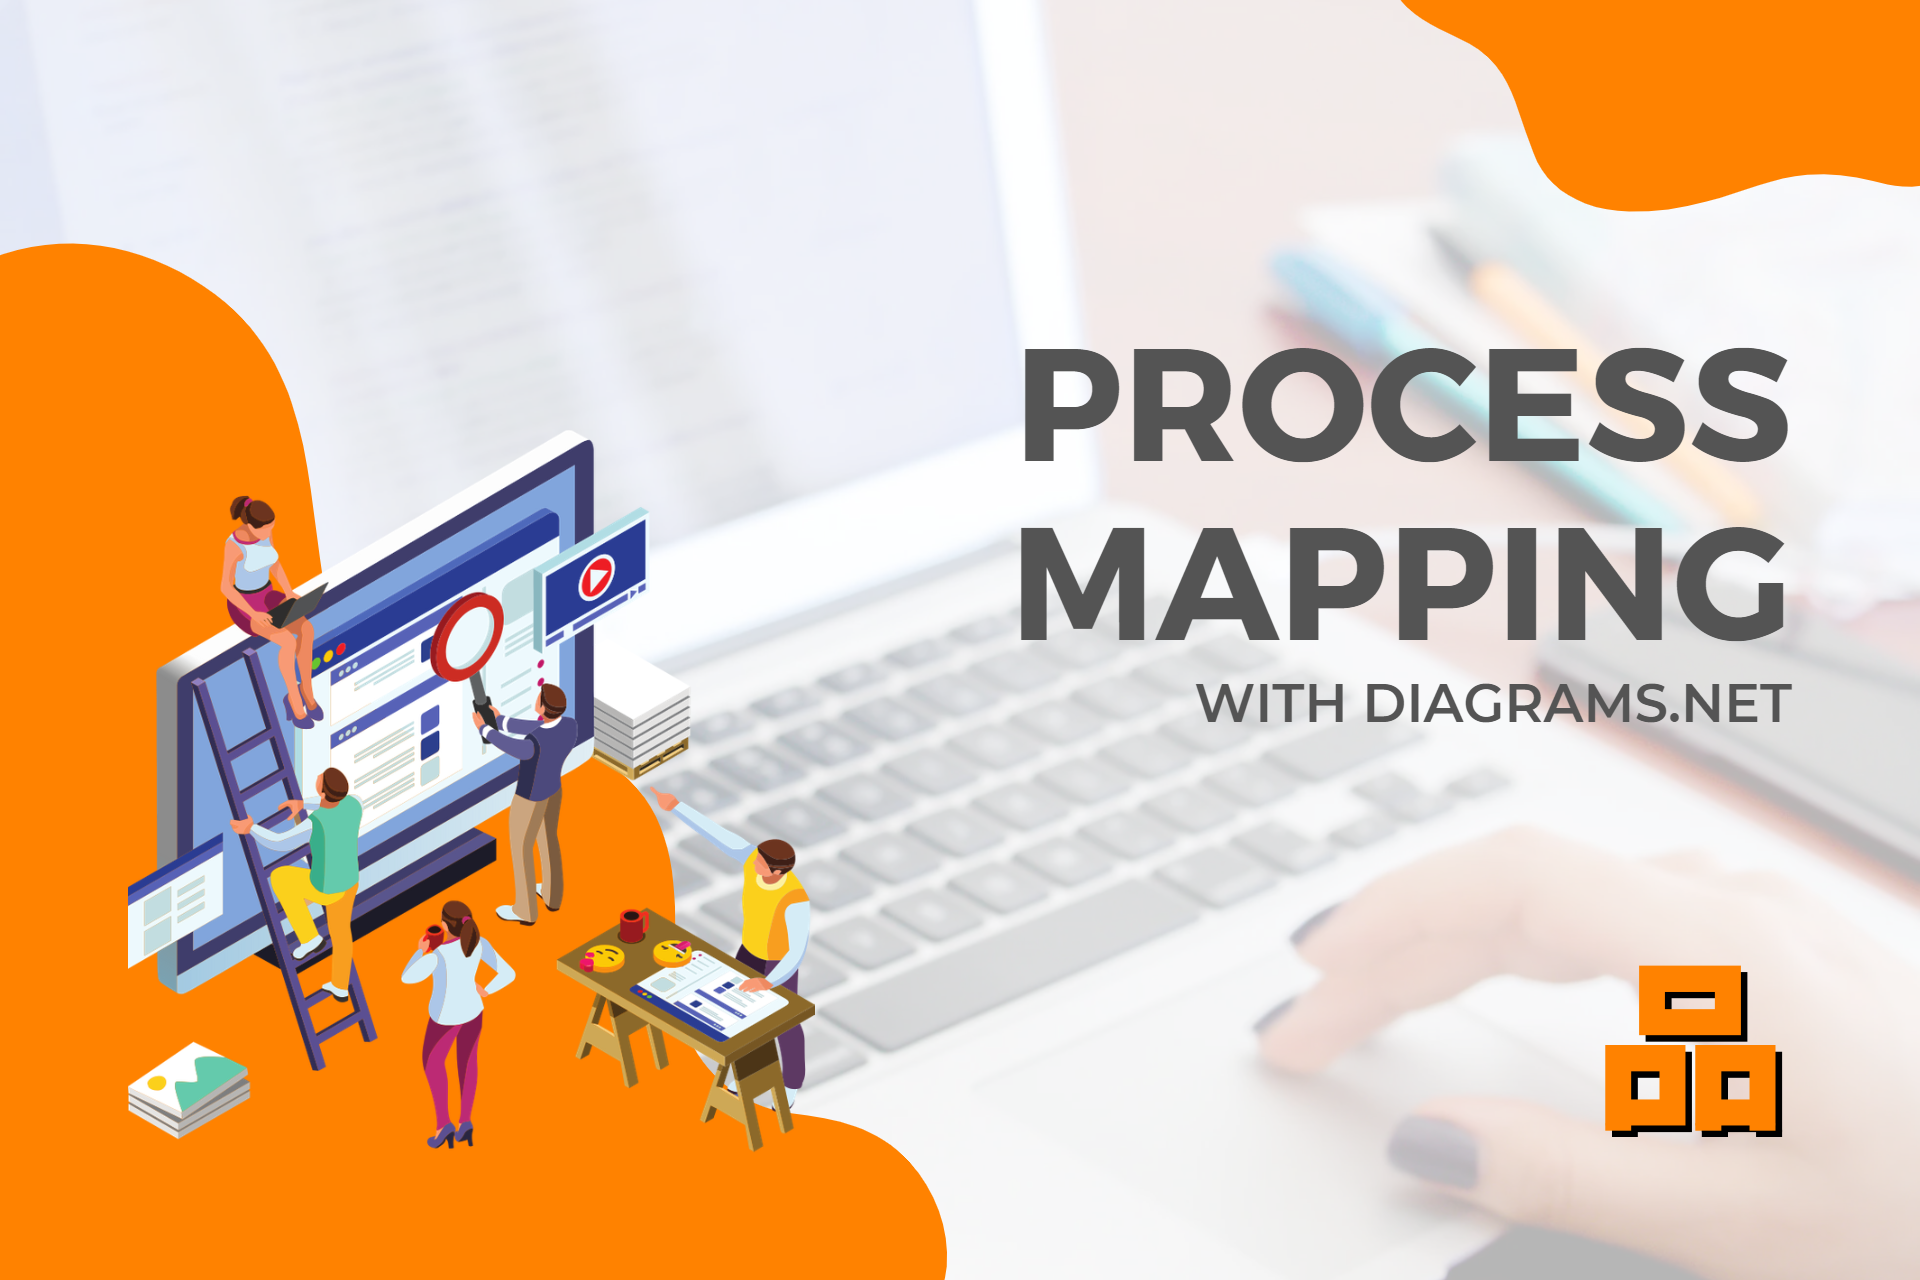 What is a Process Map and how to make one using Diagrams.net